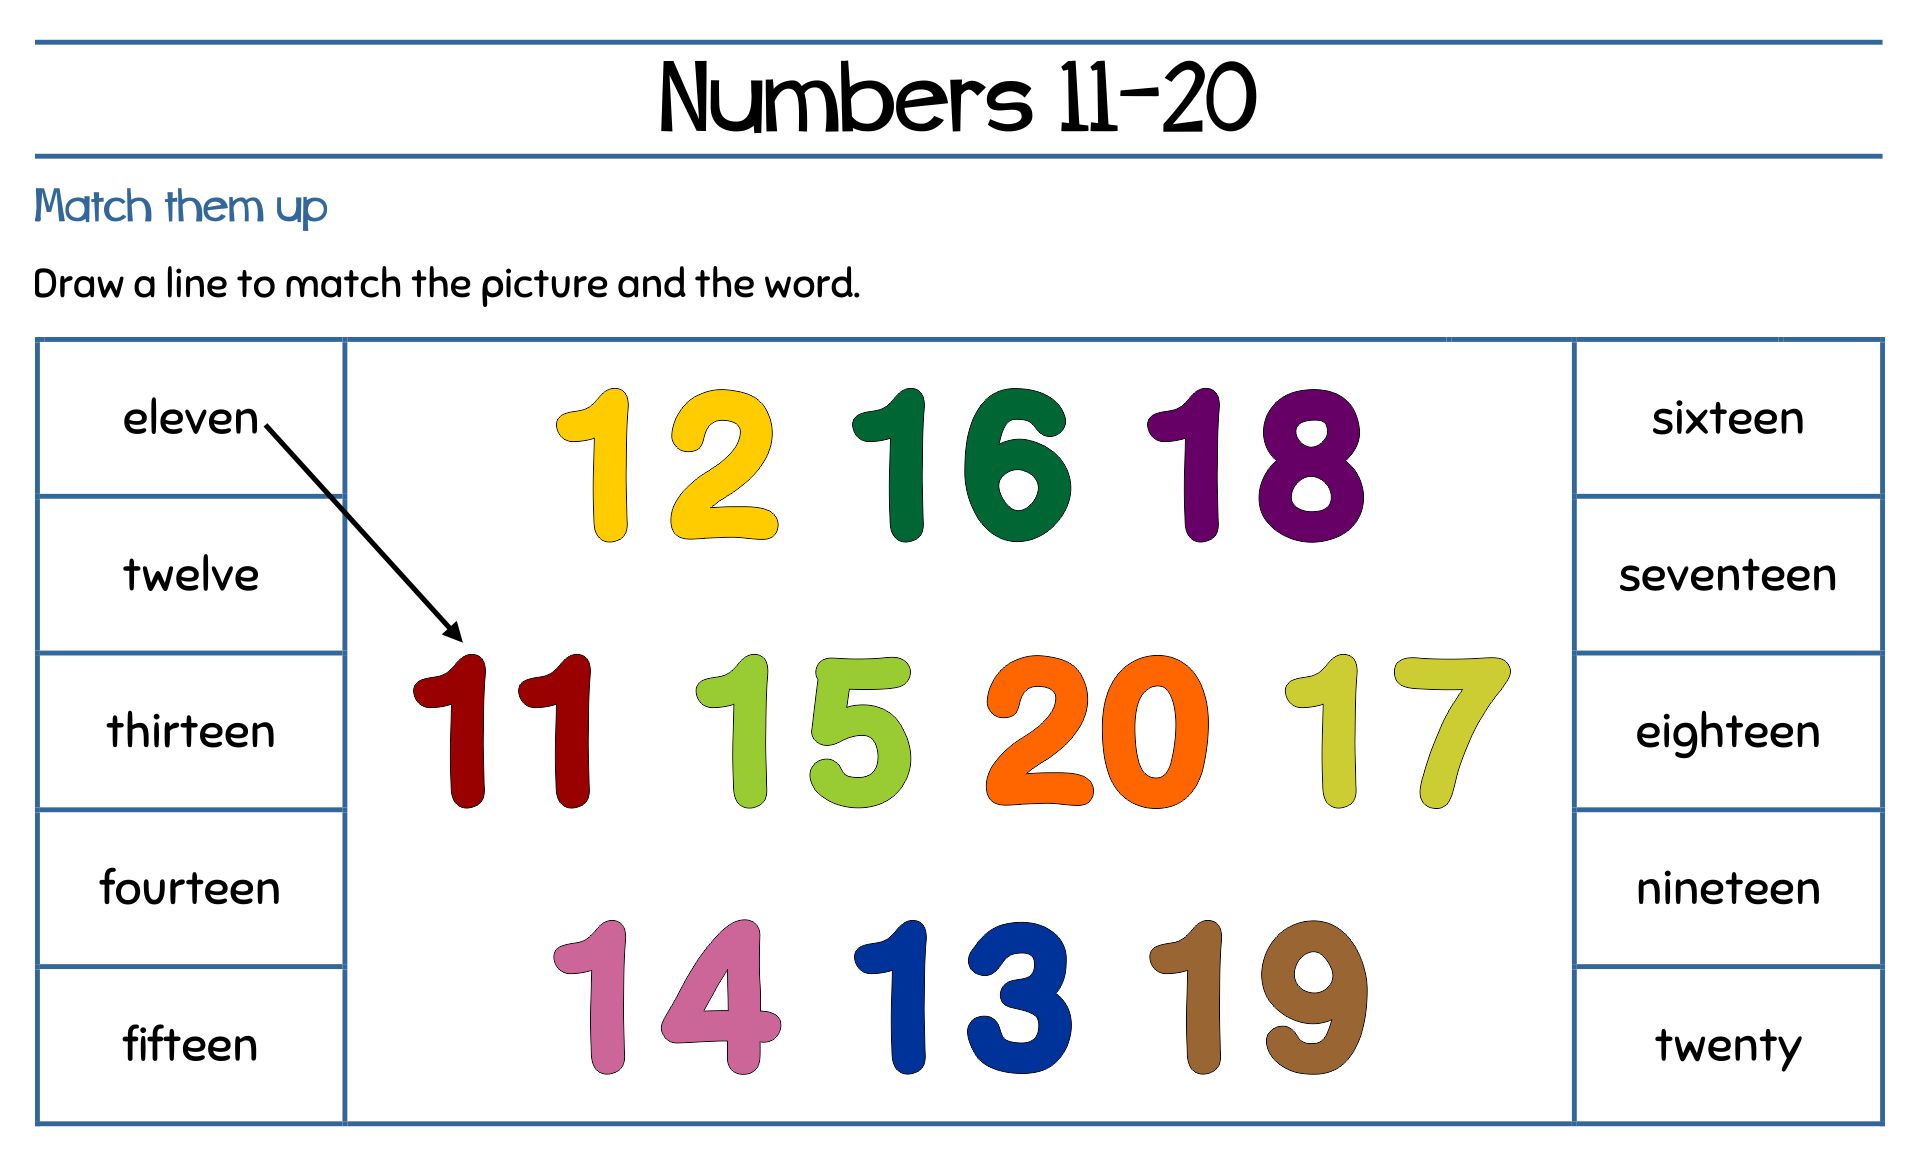 abc-chart-printable-for-kids-freebie-finding-mom-10-best-large-printable-numbers-11-20